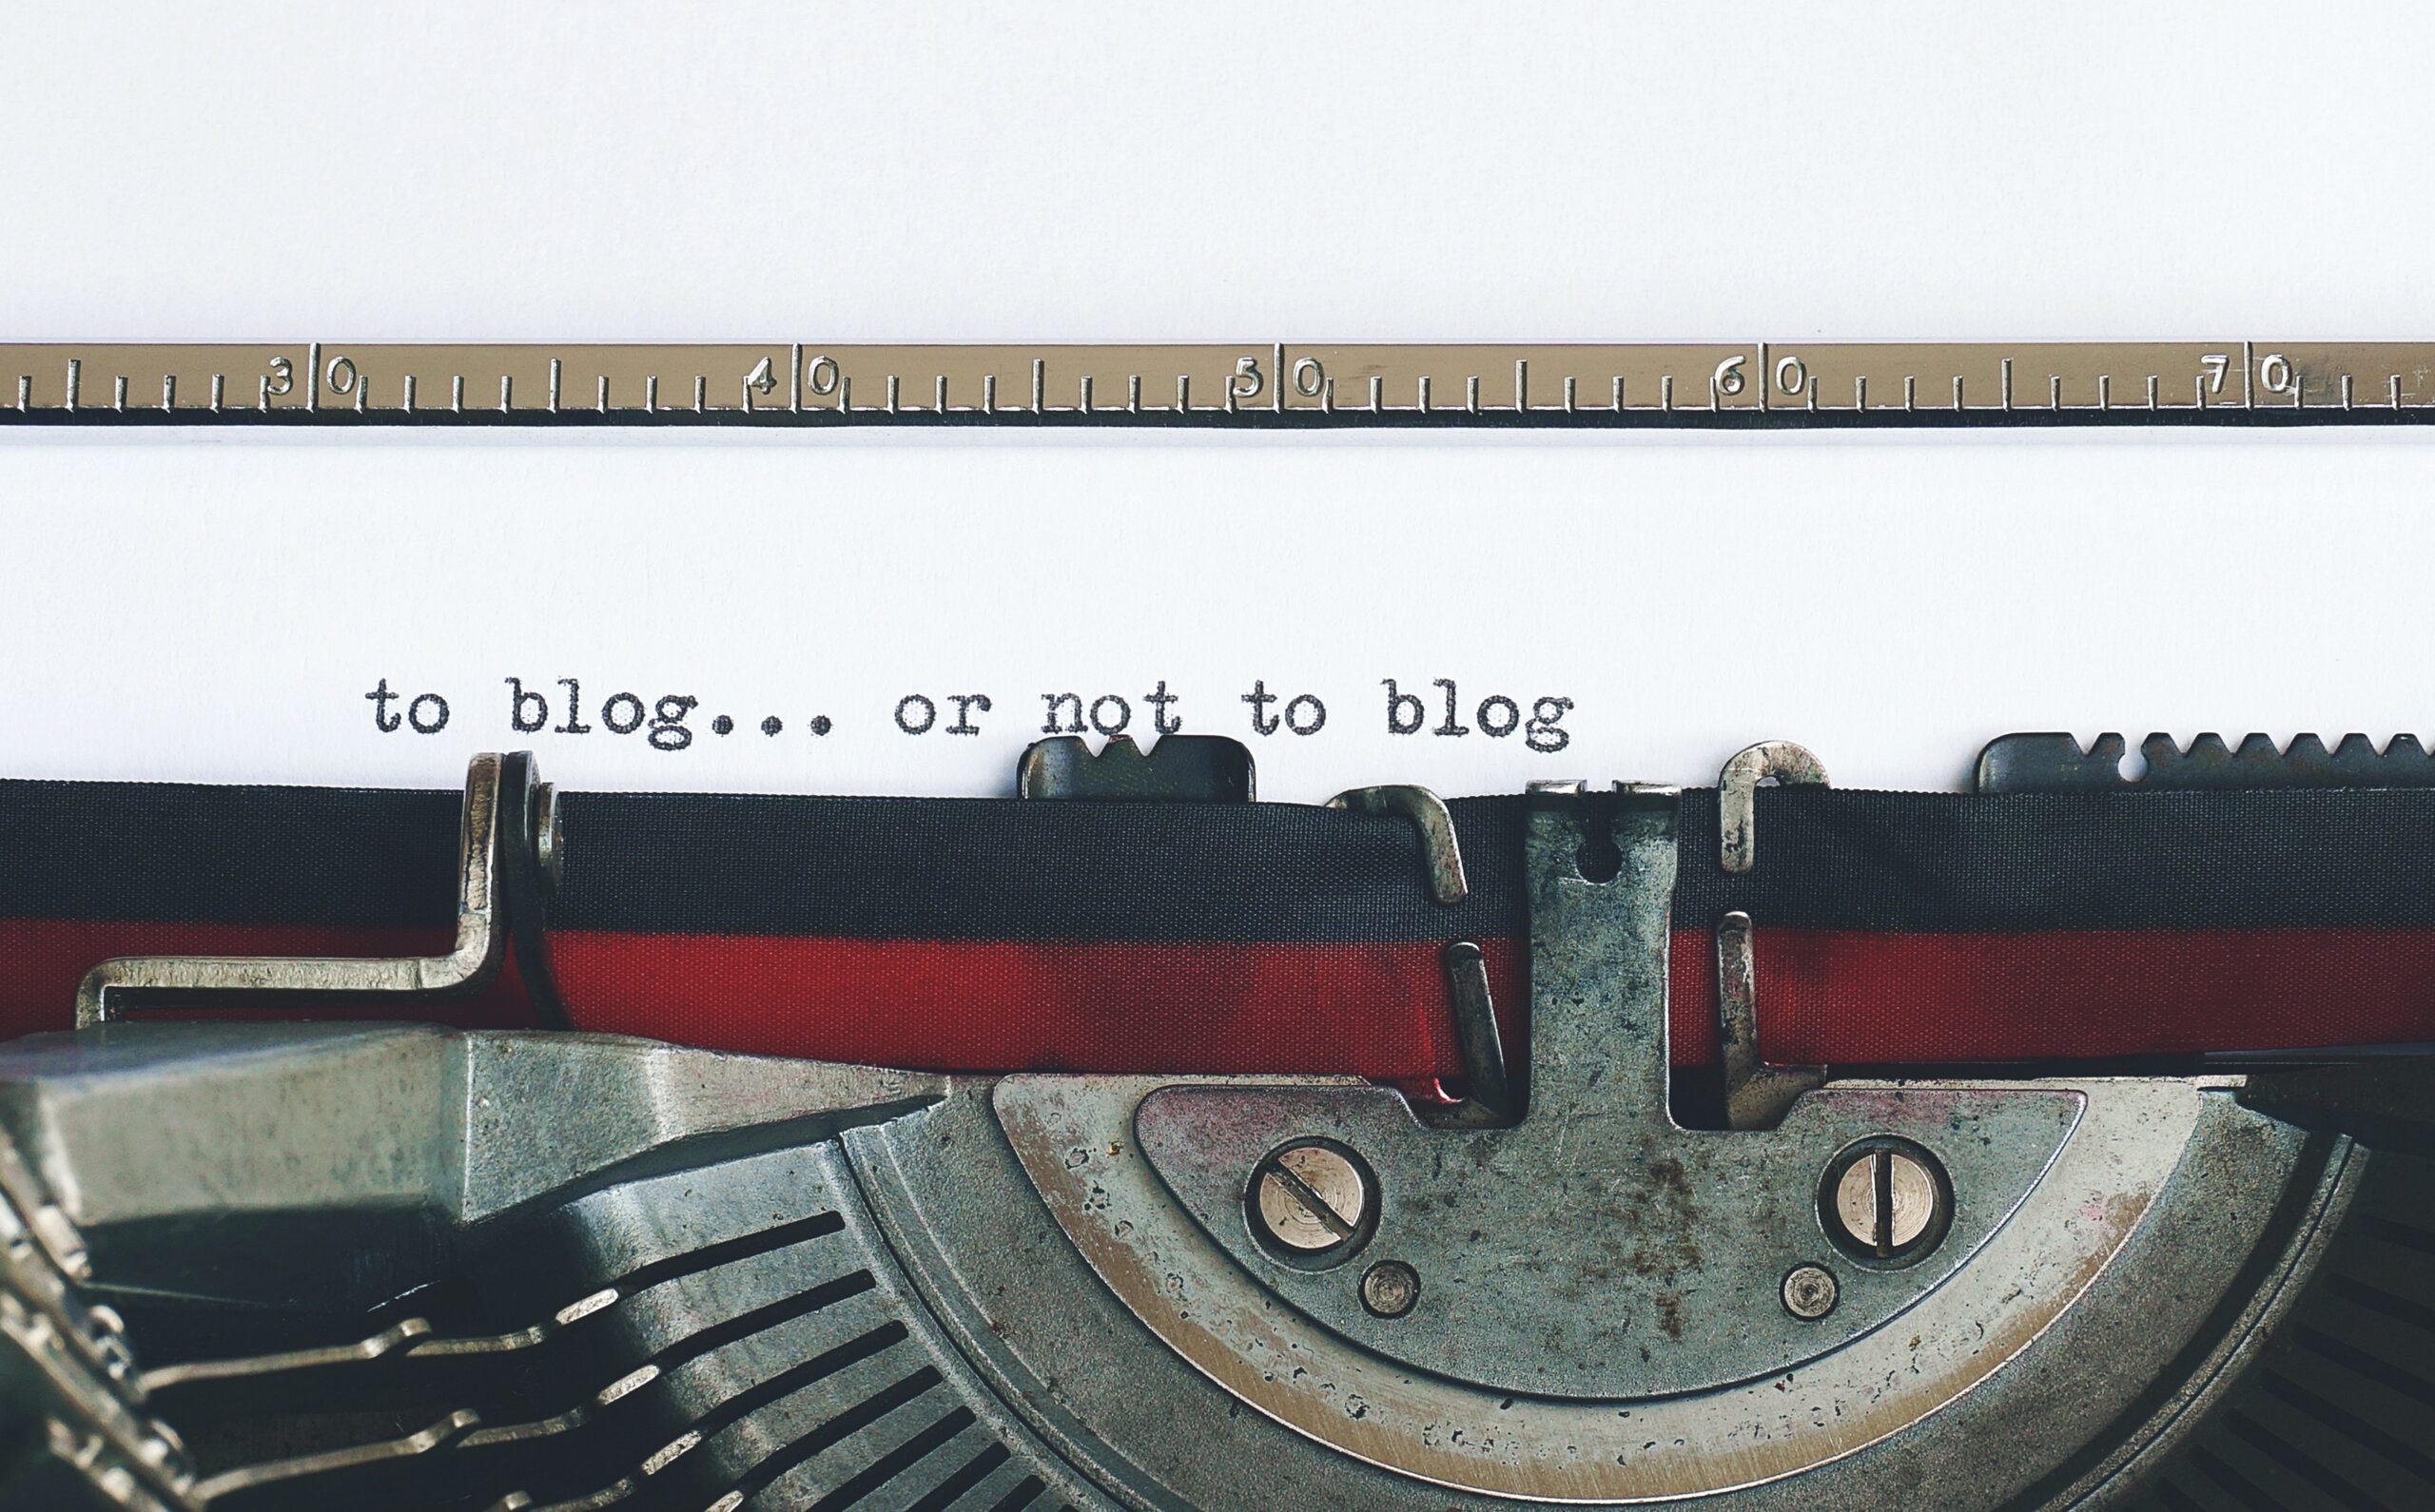 Typewriter - Rachel Writes blog 'Why should I have a blog on my company website?'